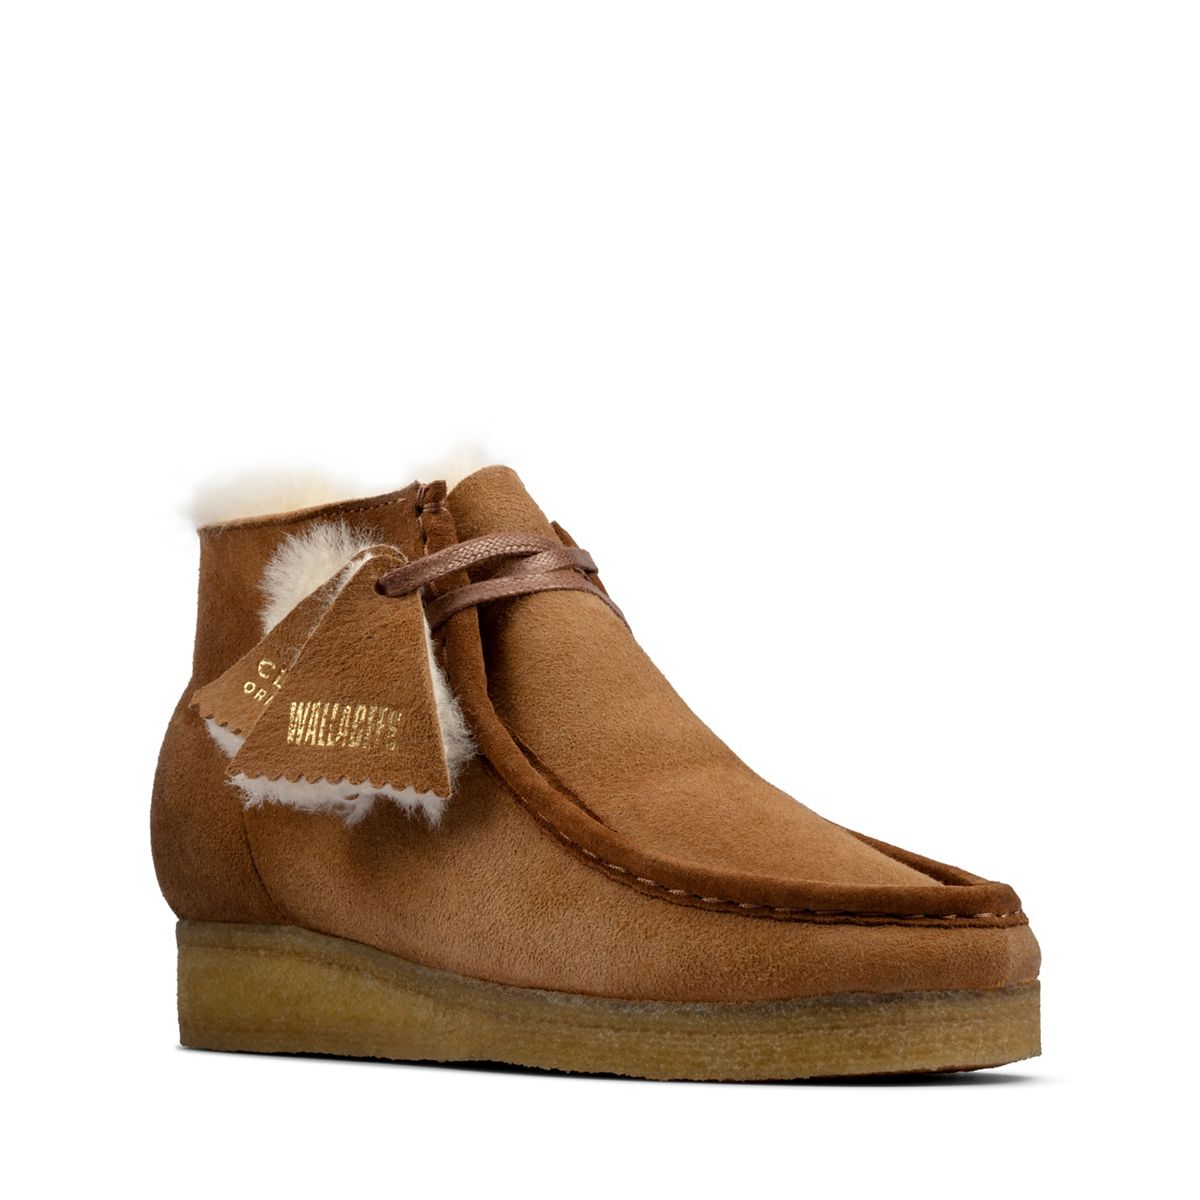 Wallabee Boot Tan Warmlined Leather - Clarks Canada Official Site | Clarks  Shoes